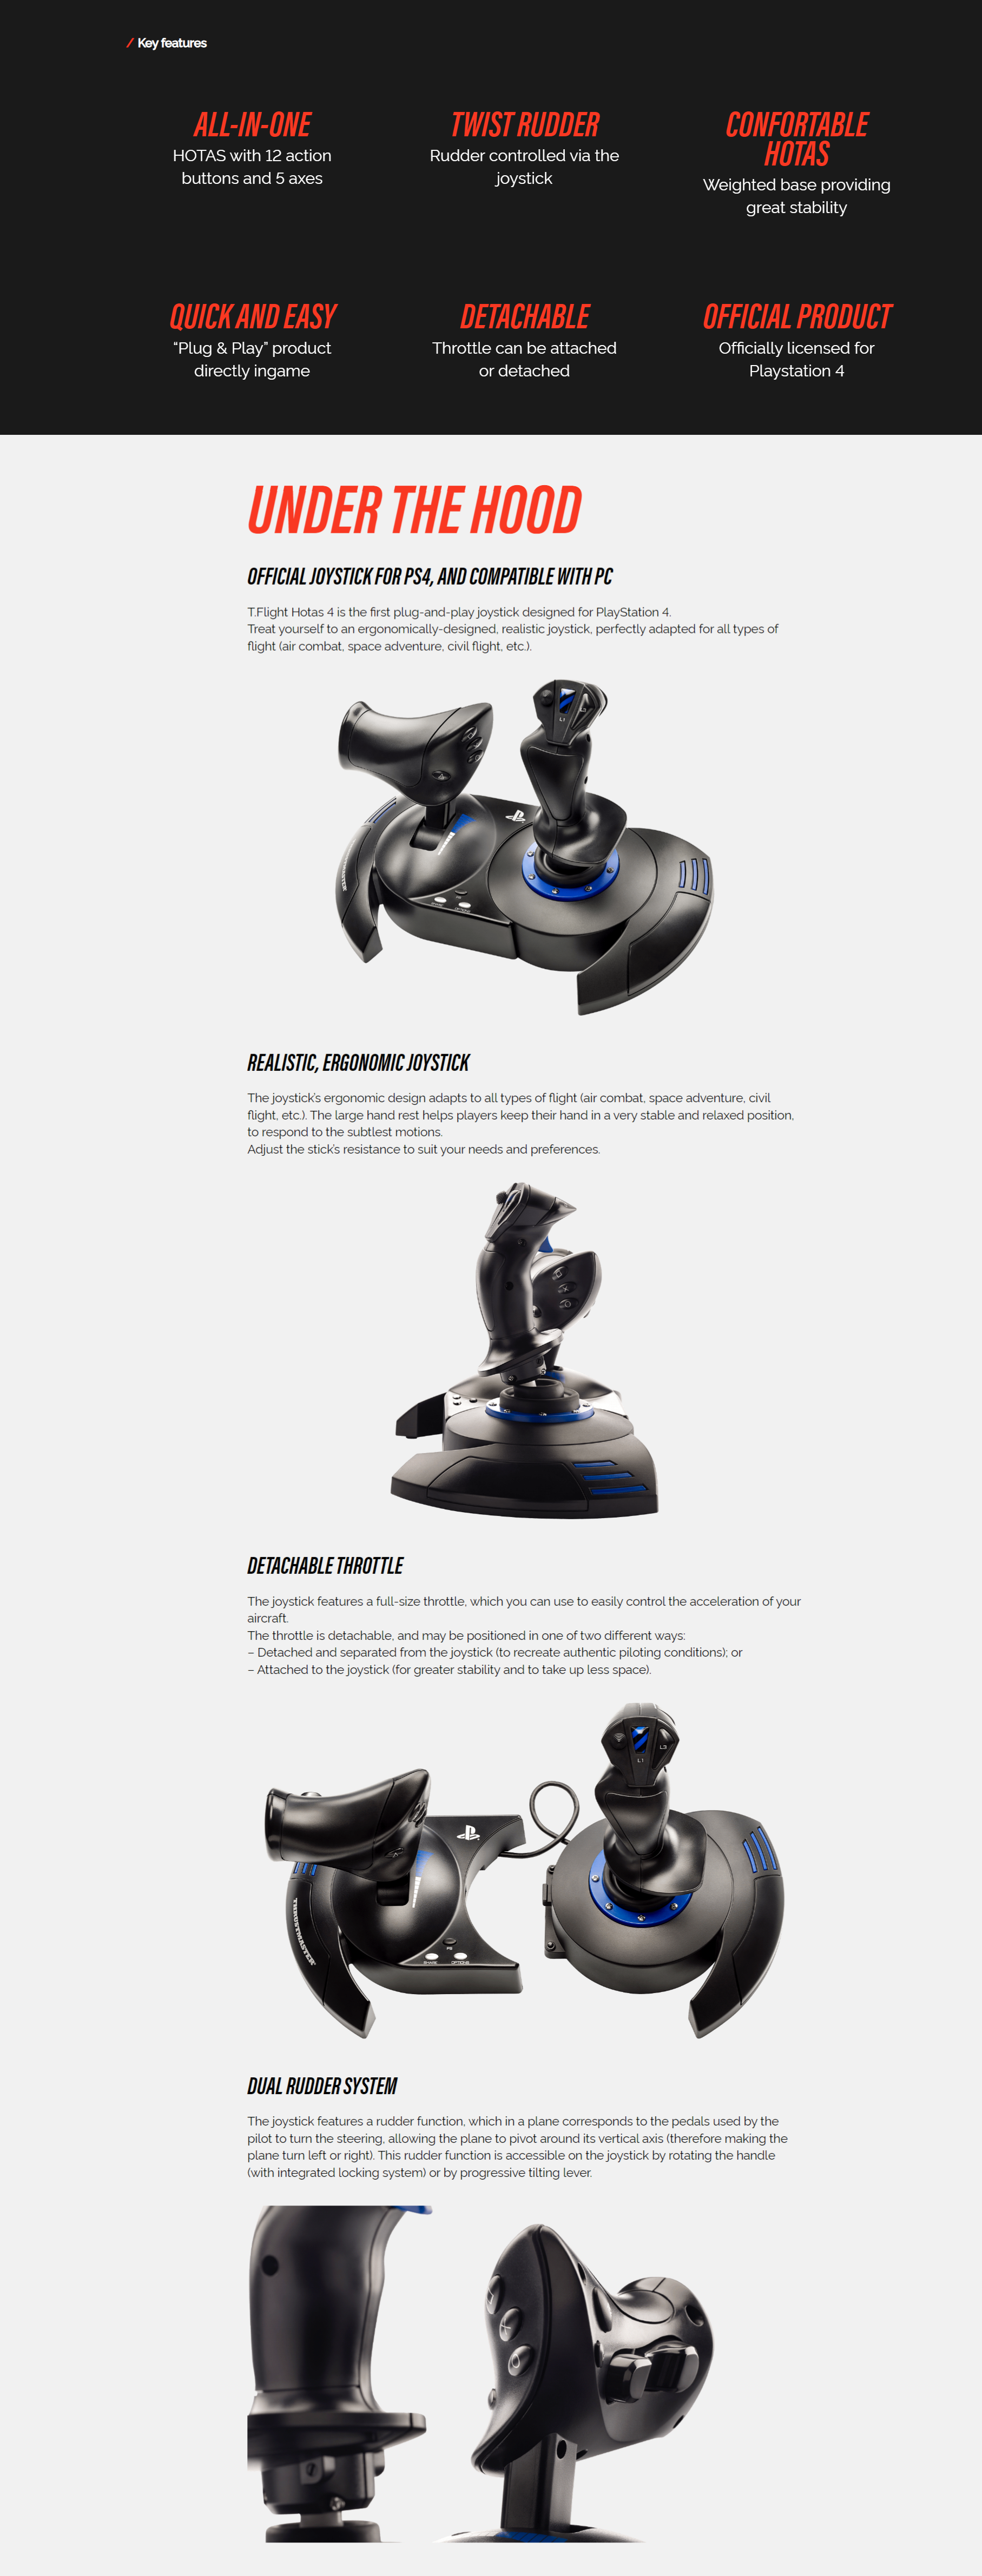 A large marketing image providing additional information about the product Thrustmaster T.Flight HOTAS 4 - Joystick & Throttle for PC / PS4 / PS5 - Additional alt info not provided